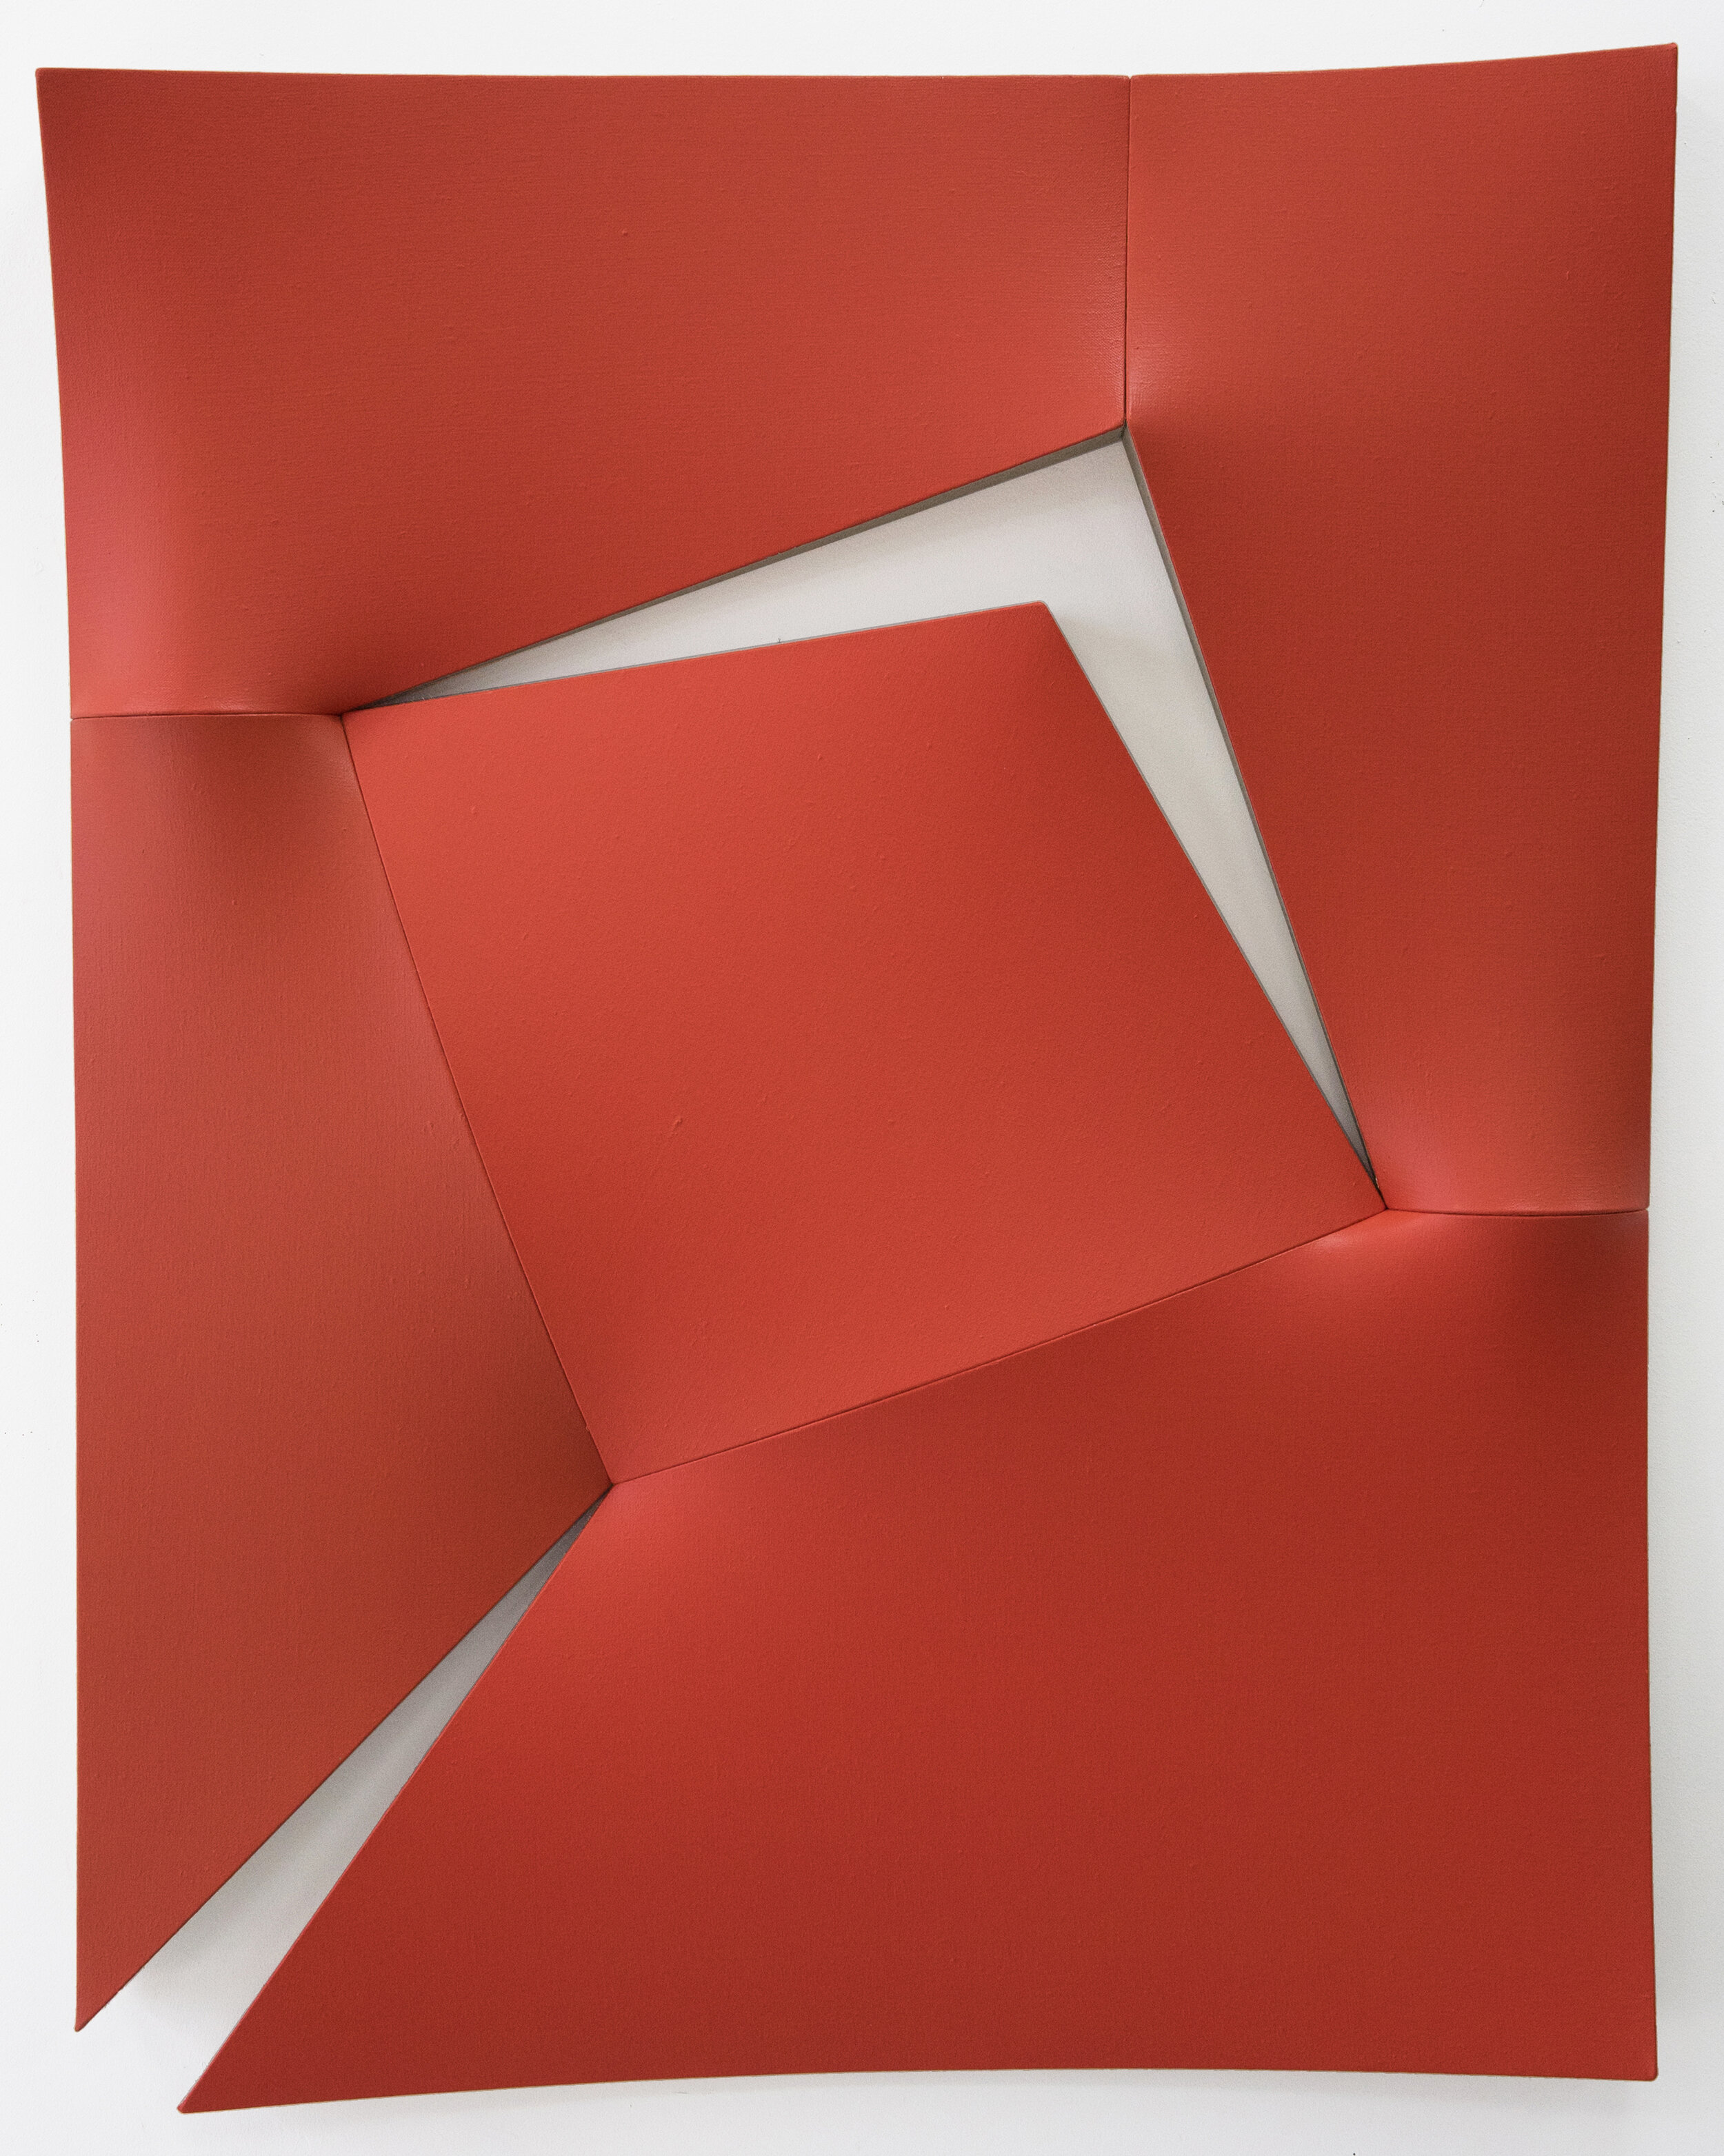 TEAR AND CUT IN REDS | 45.5 x 35.5 x 2.75 inches / 115 x 90 x 7 cm, acrylics on linen, 2021